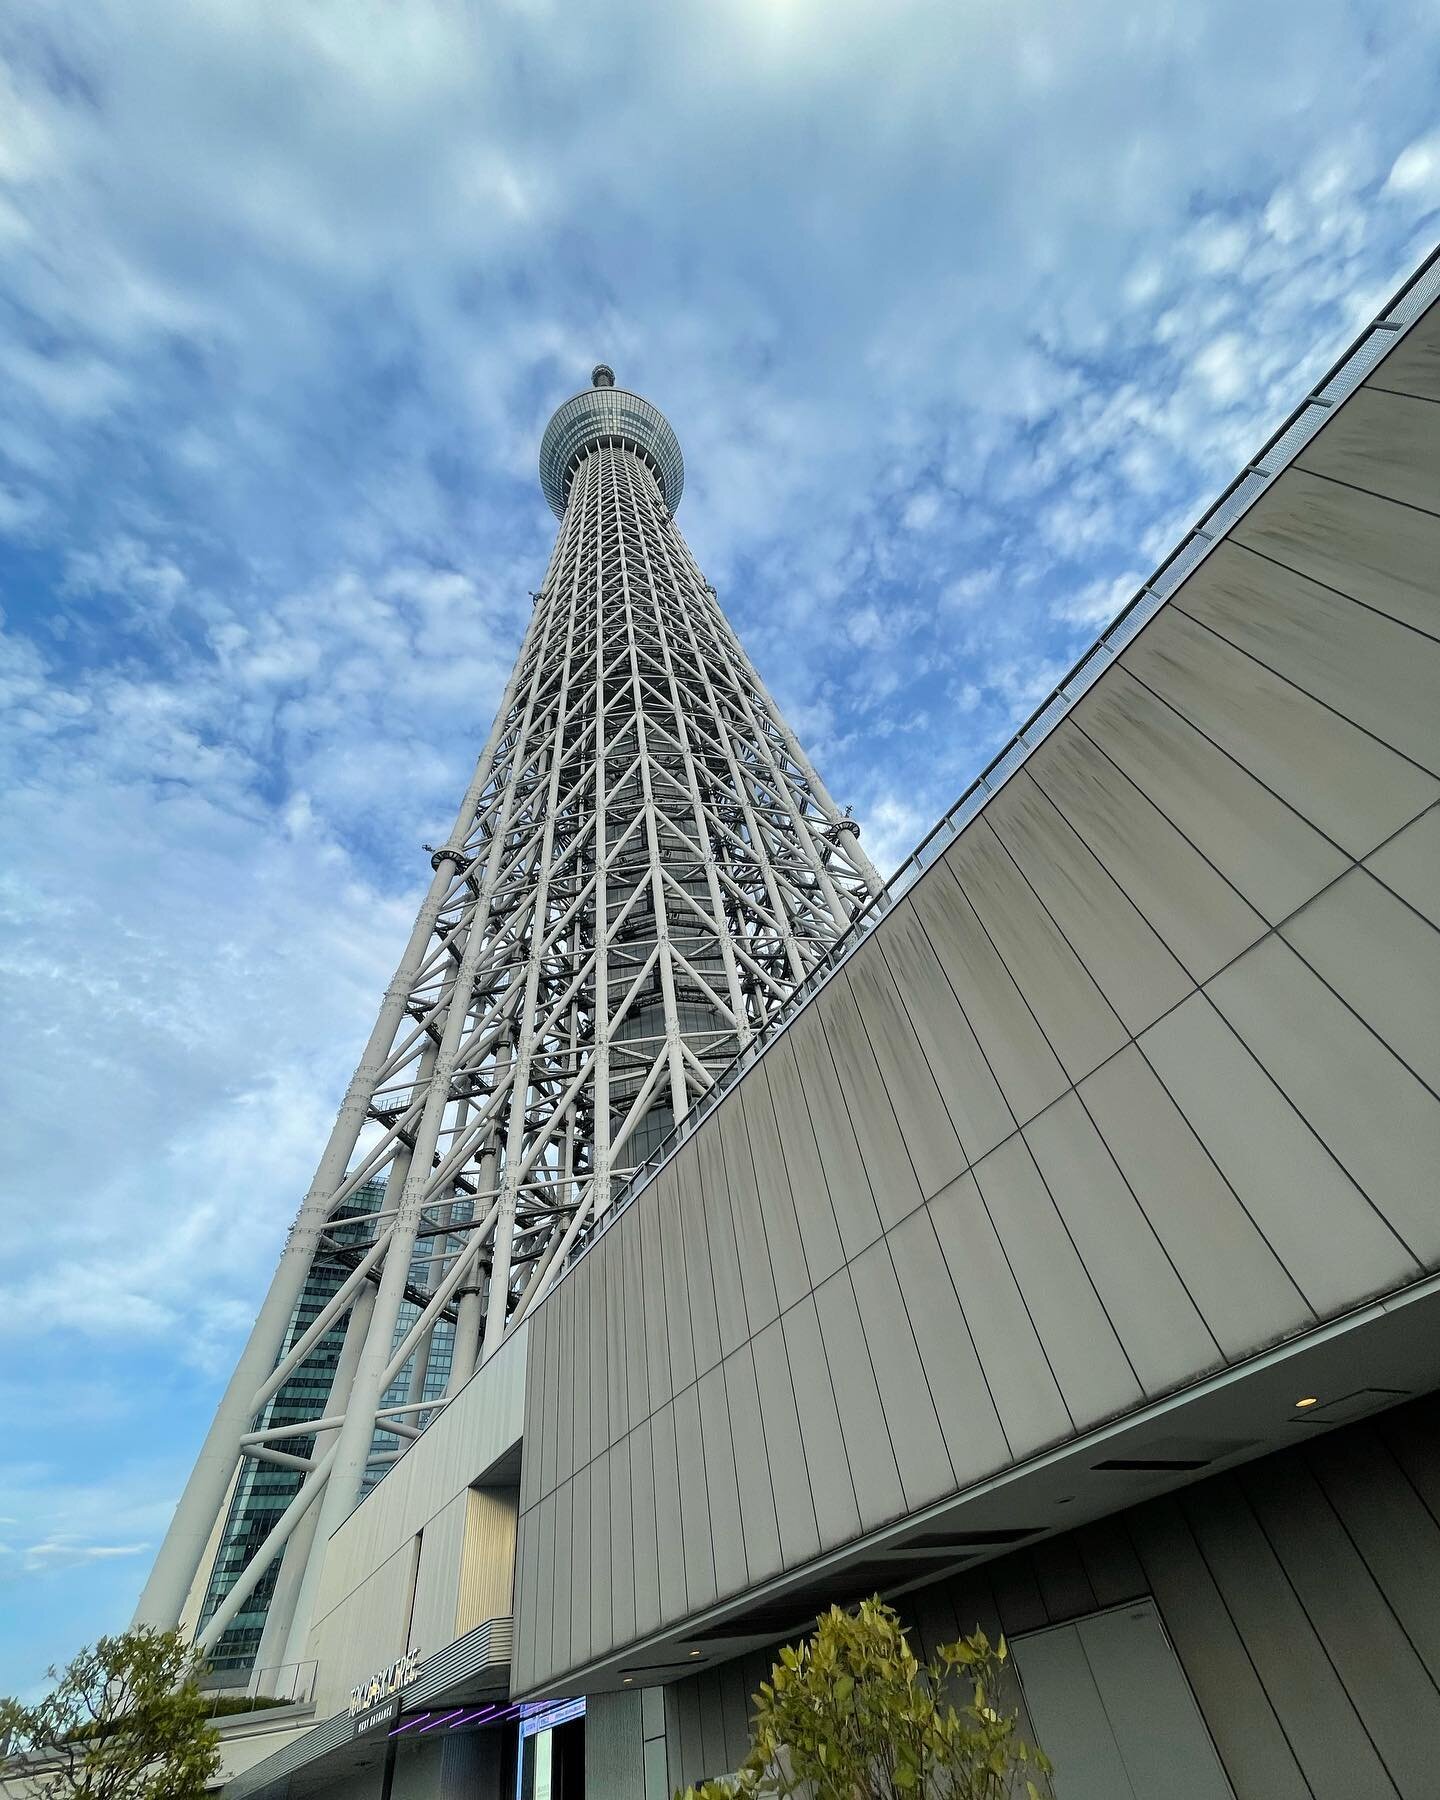 First Tokyo Tower, and #tokyo #skytree #tokyoskytree !

In all the years I&rsquo;ve been here, I actually had never go up the tower. Figured never was there a better time than now.

The vistas of Tokyo were absolutely expansive. The #city really does